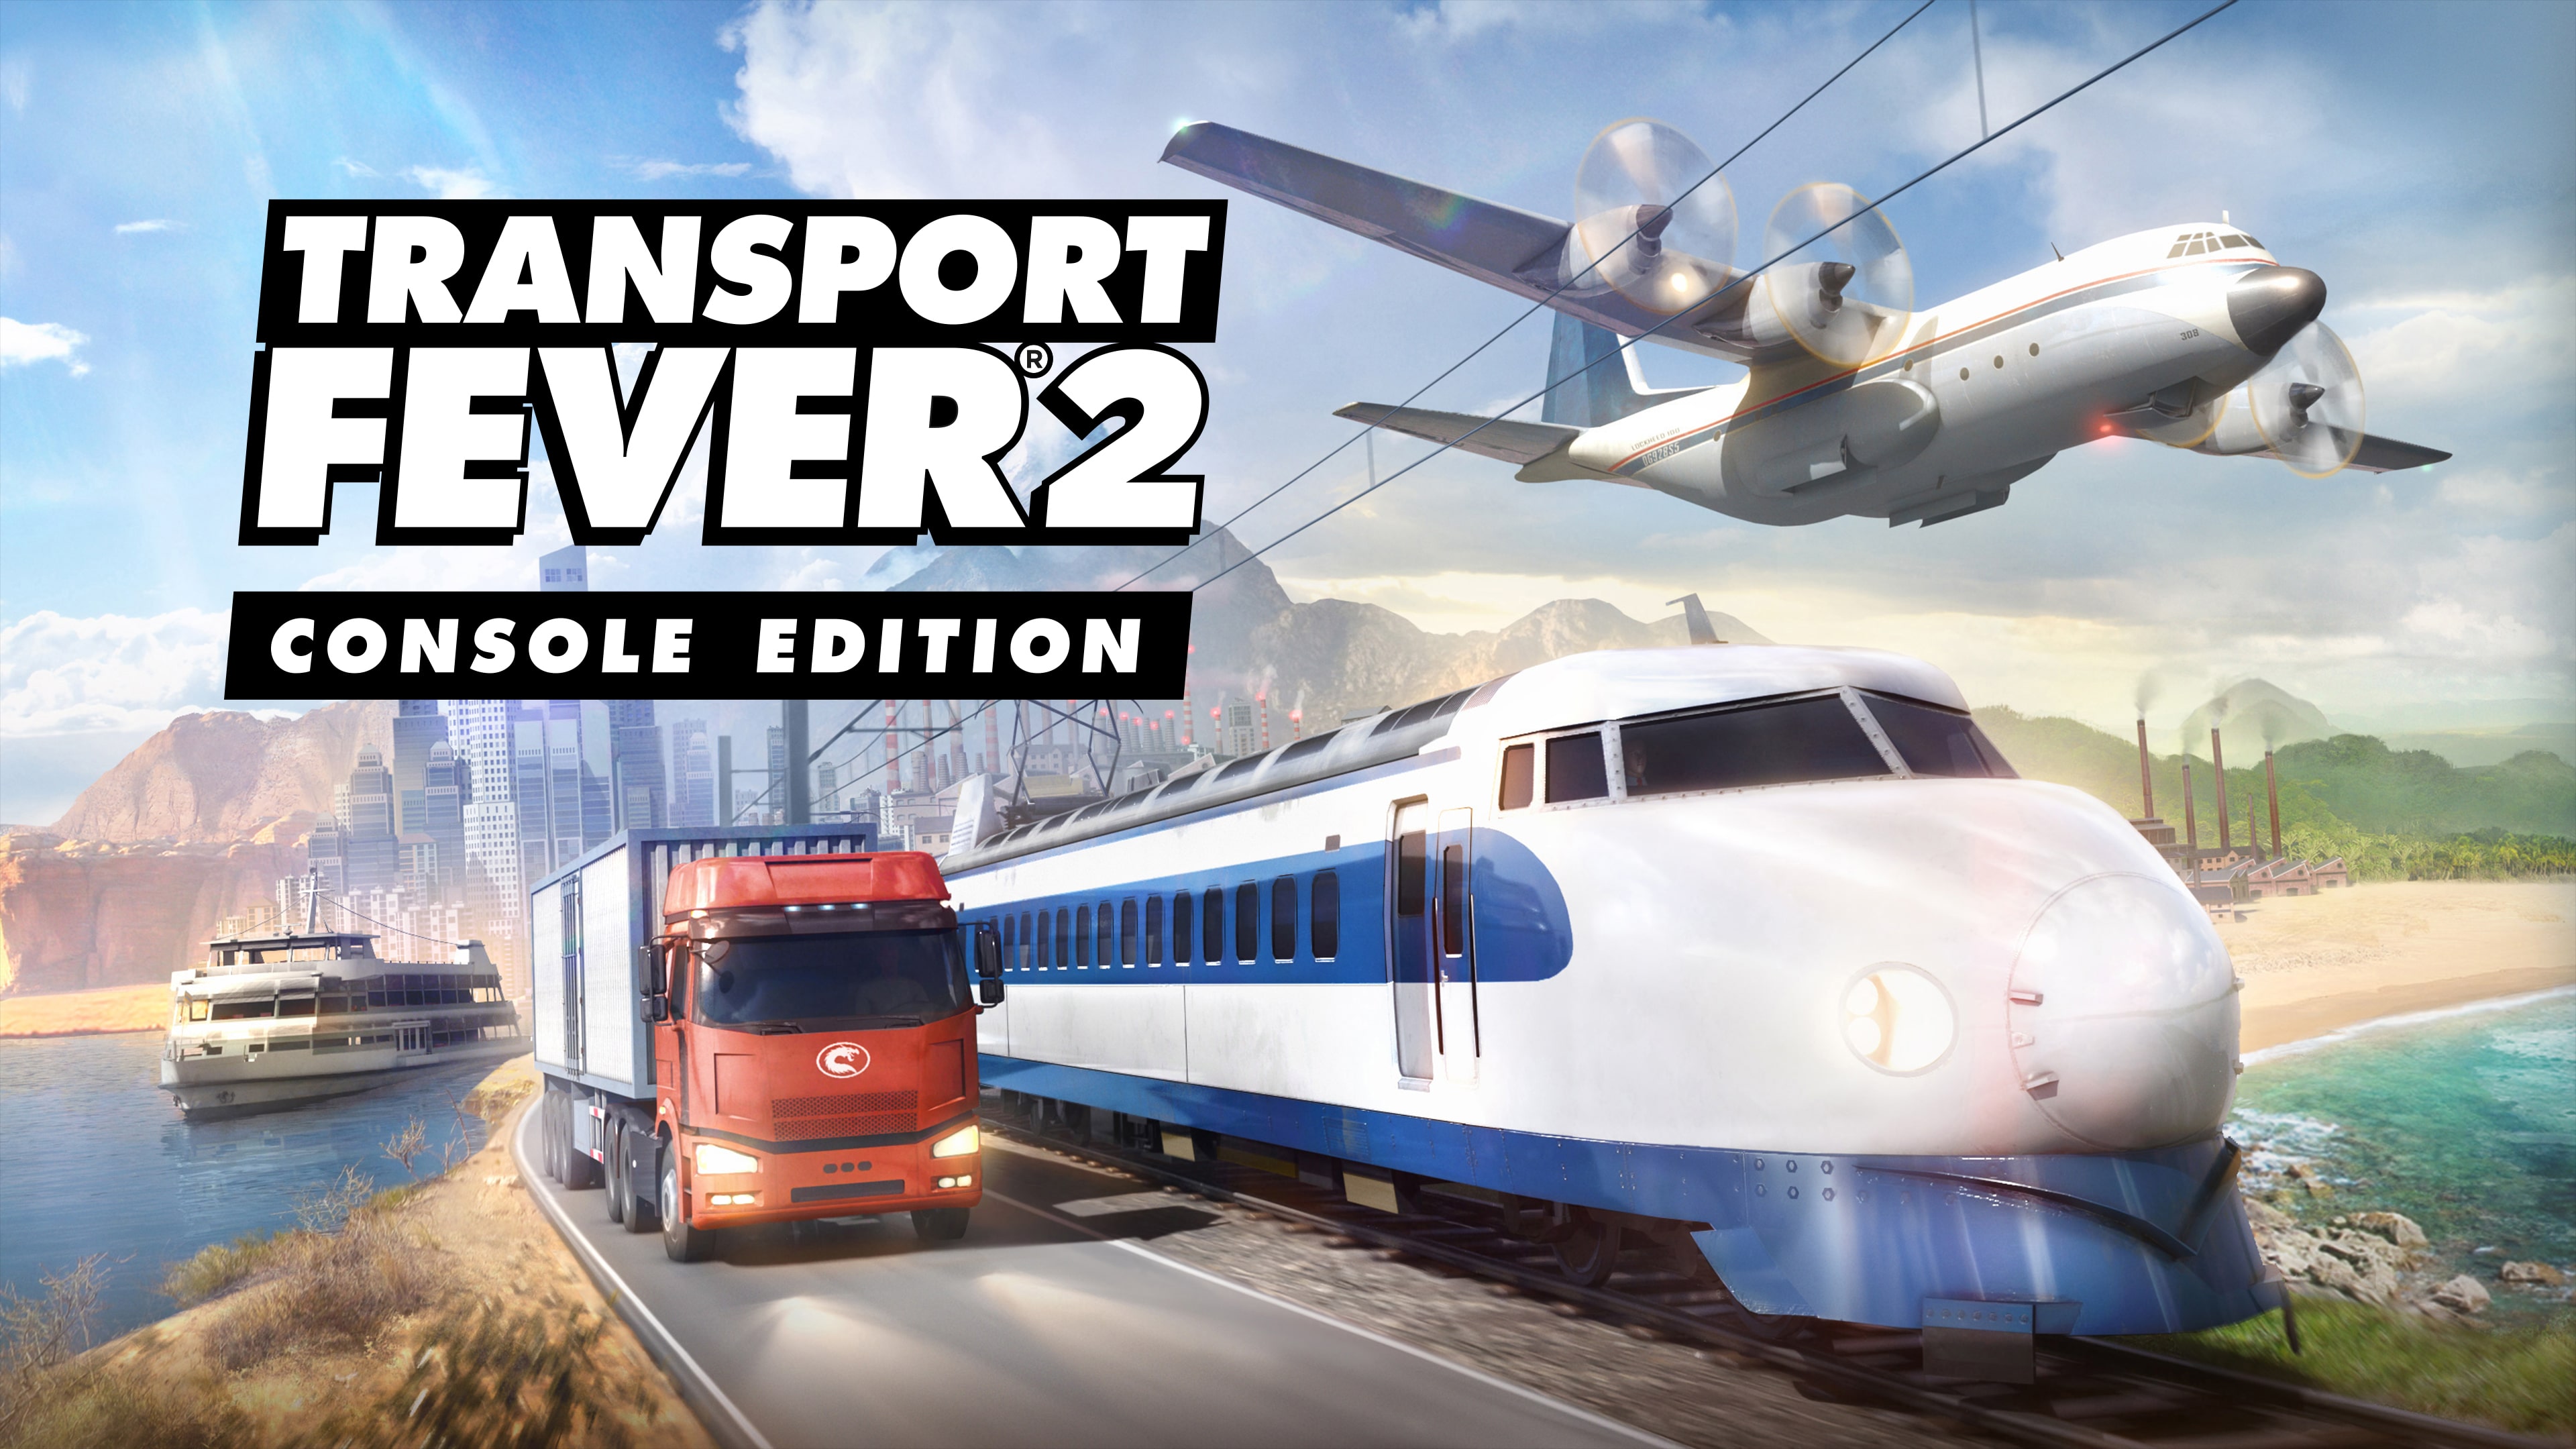 Transport Fever 2: Console Edition (Simplified Chinese, English, Korean, Japanese, Traditional Chinese)